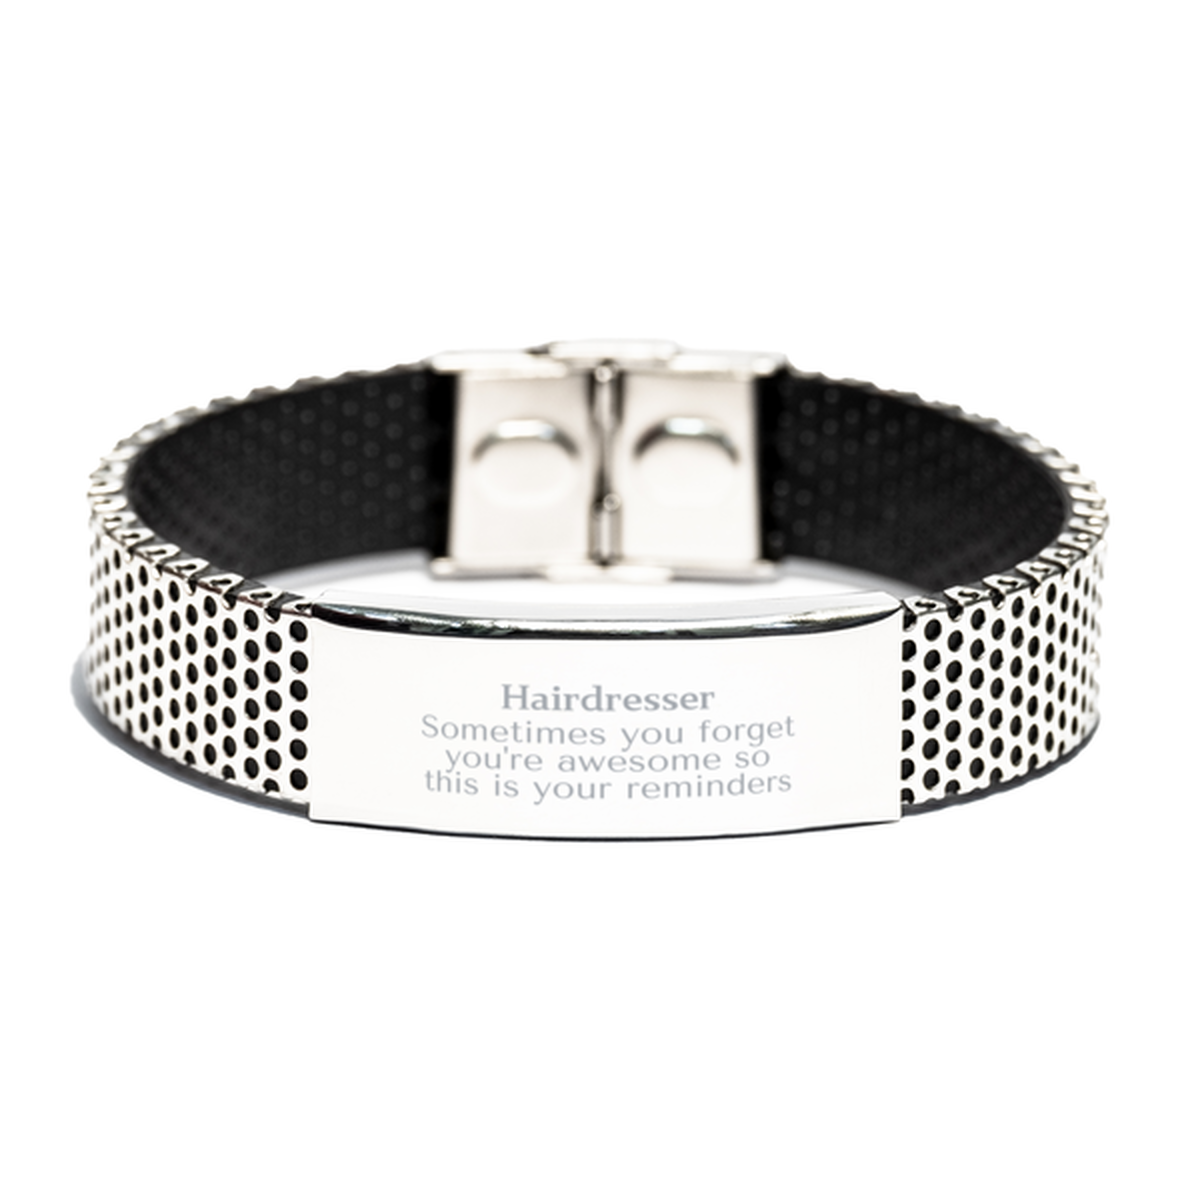 Sentimental Hairdresser Stainless Steel Bracelet, Hairdresser Sometimes you forget you're awesome so this is your reminders, Graduation Christmas Birthday Gifts for Hairdresser, Men, Women, Coworkers